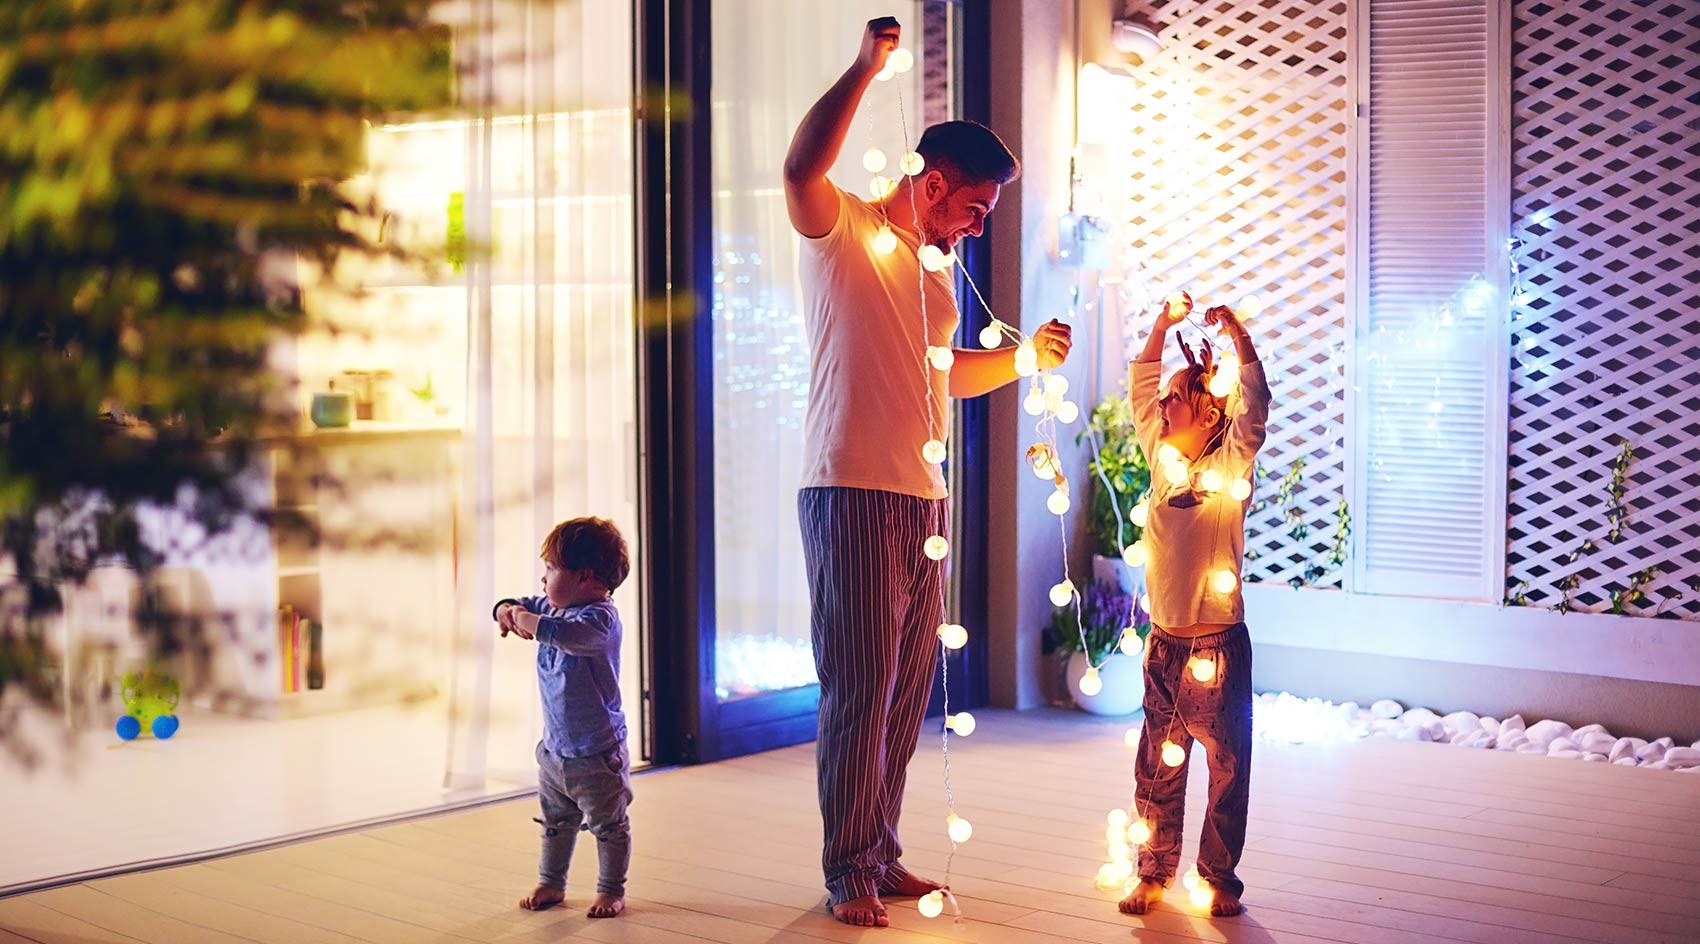 Dad reviews electrical safety tips with kids while hanging light strands